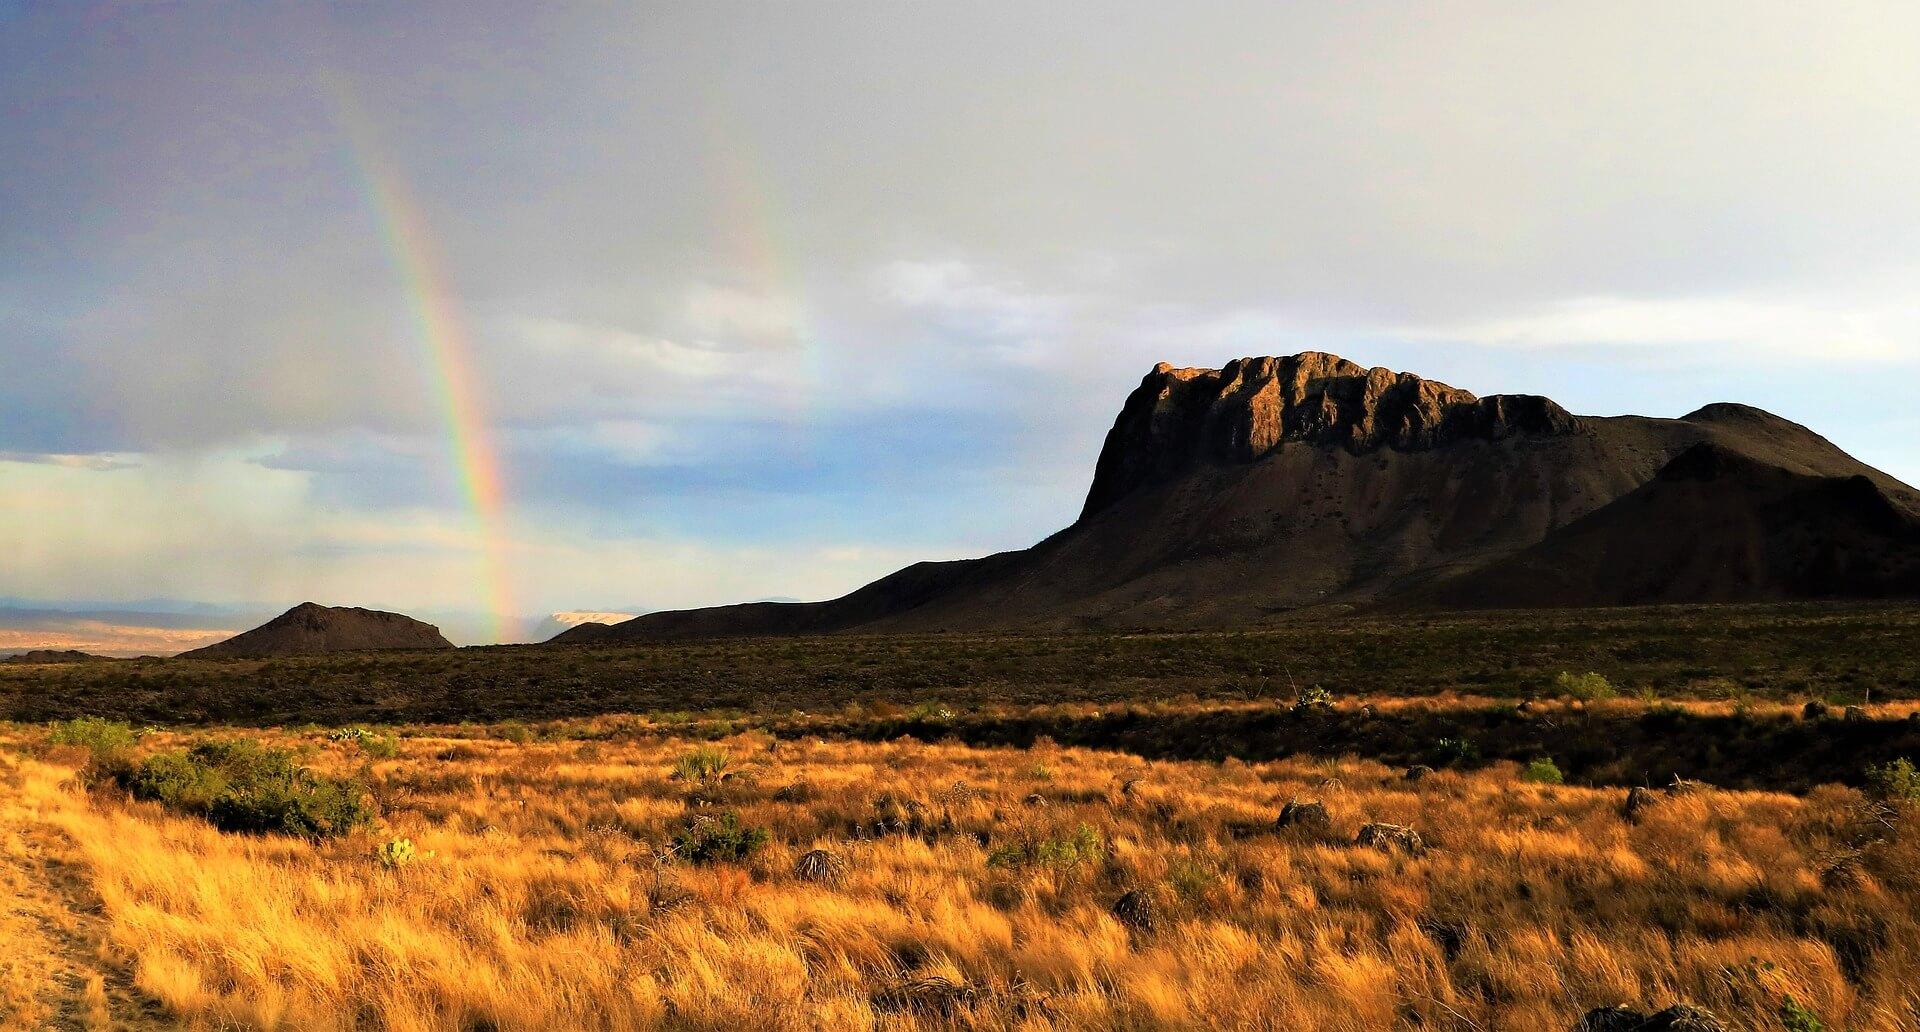 A rainbow falling over the Big Bend National Park